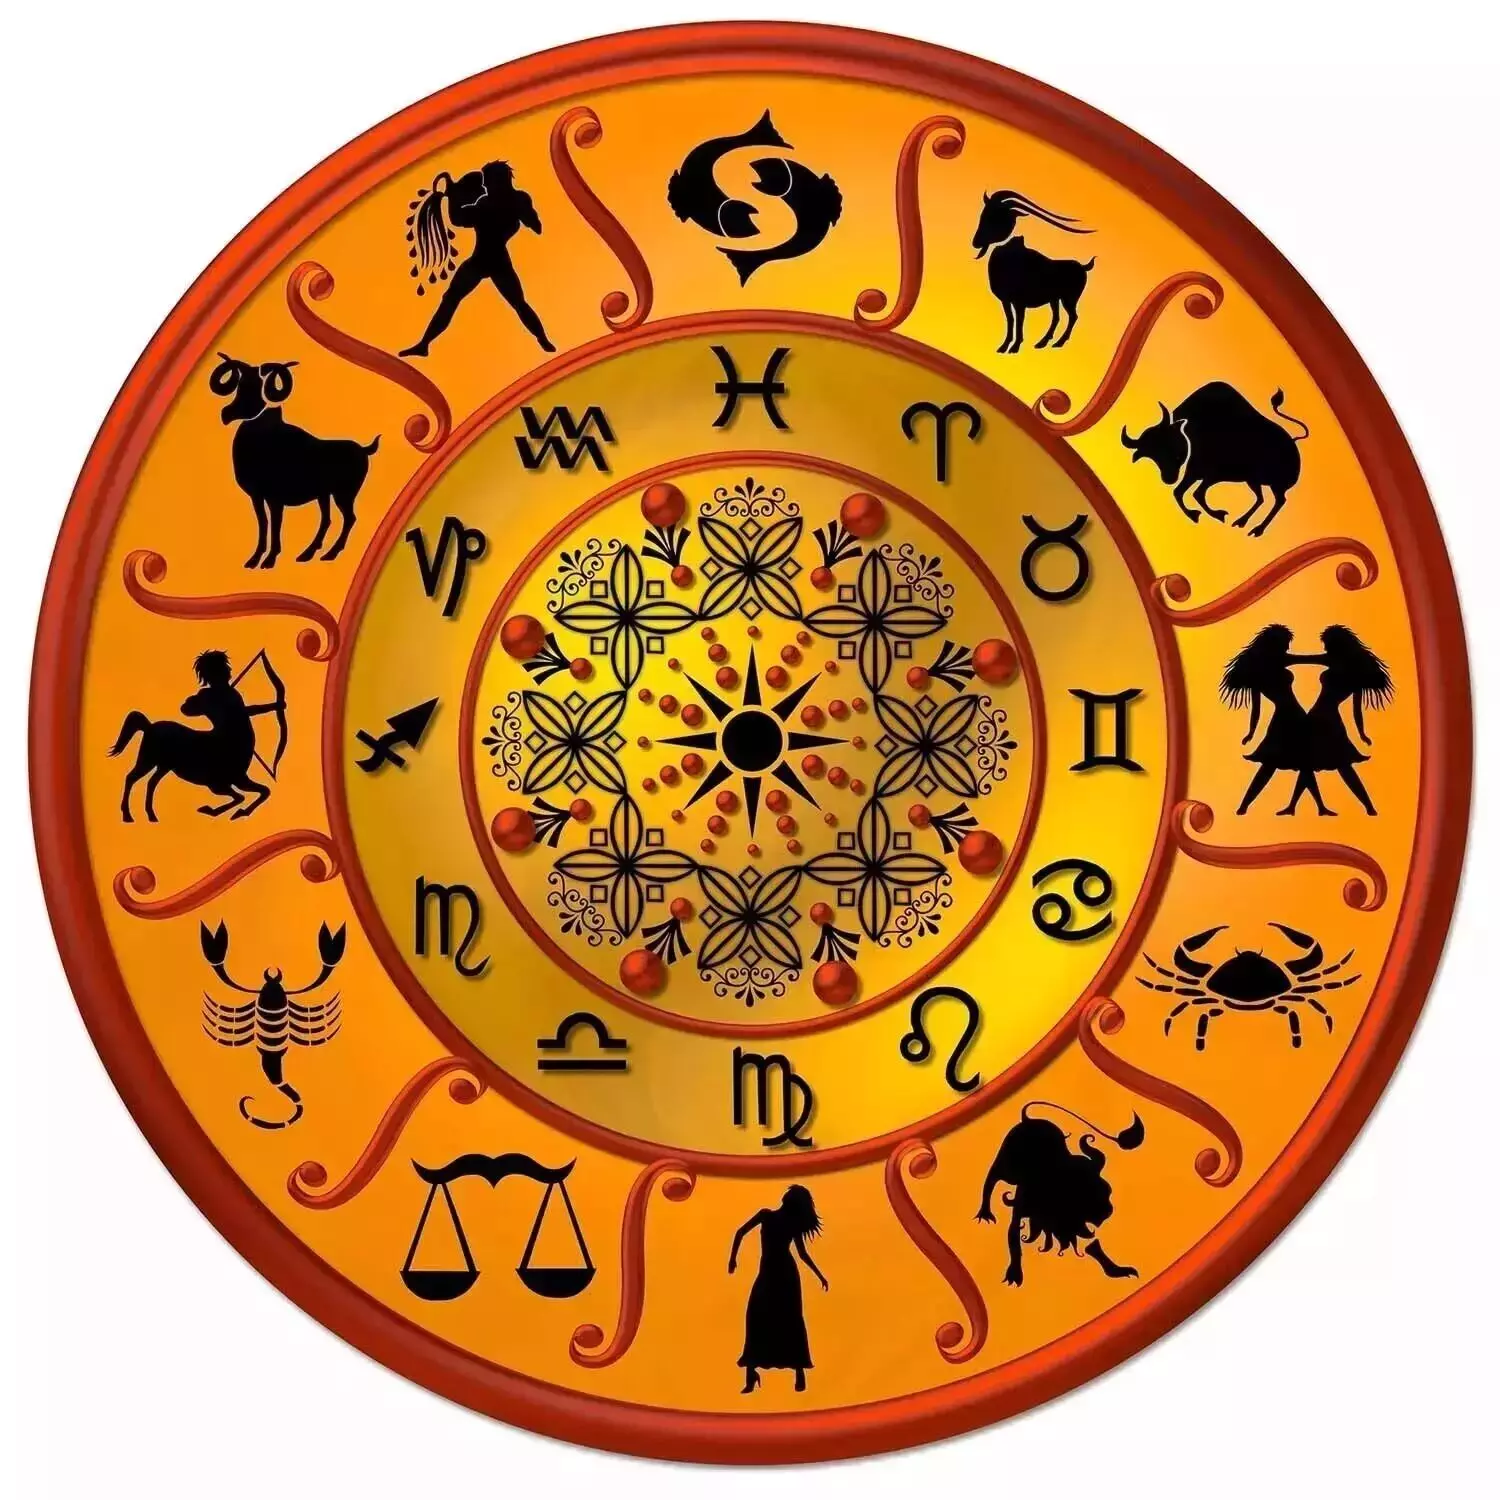 10 May – Know your todays horoscope